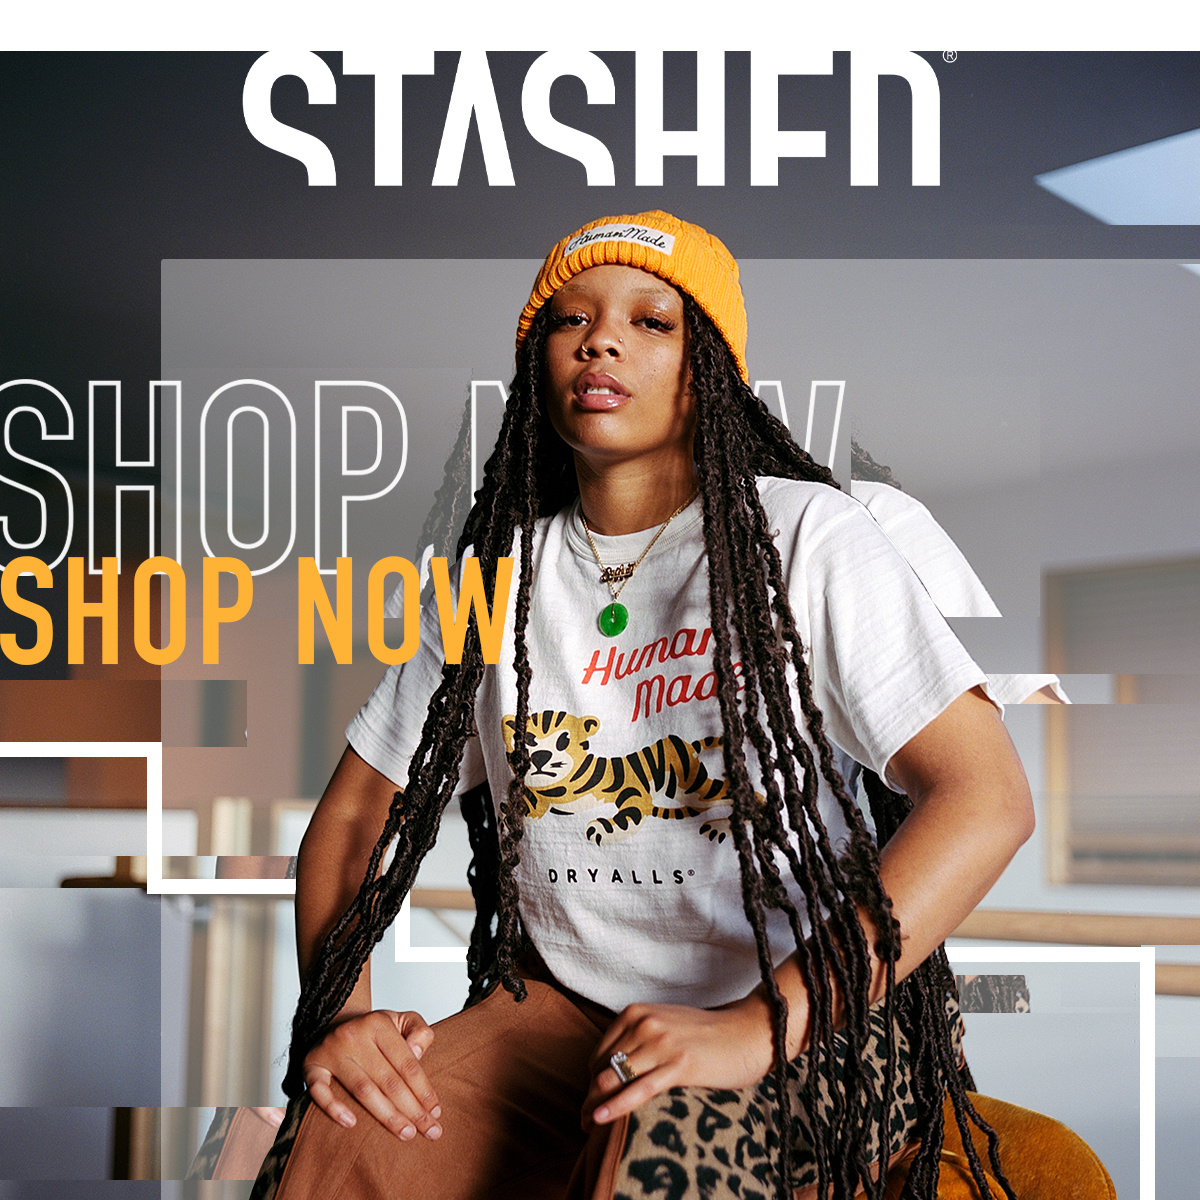 Stashed Clothing Ad Campaign by Ally Huff on Dribbble